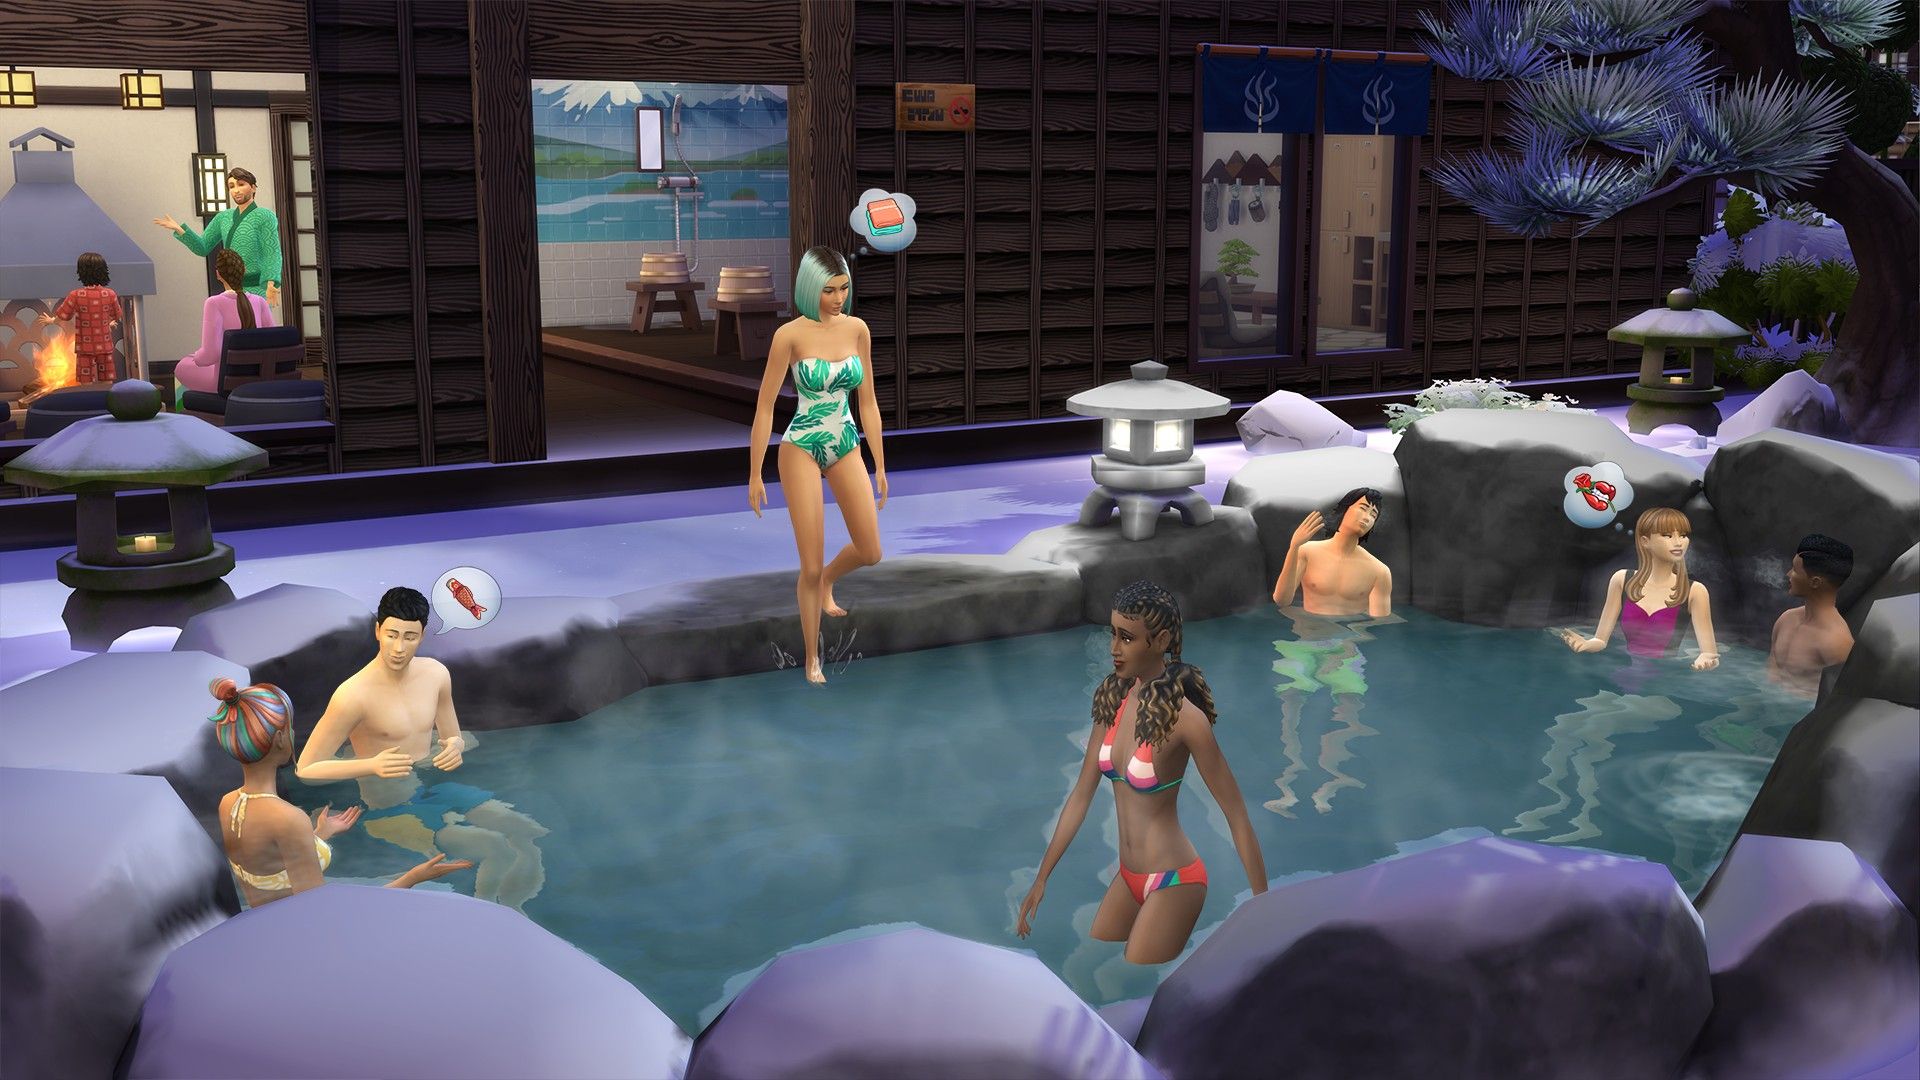 Sims use the Hot Springs and Bath House in The Sims 4: Snowy Escape